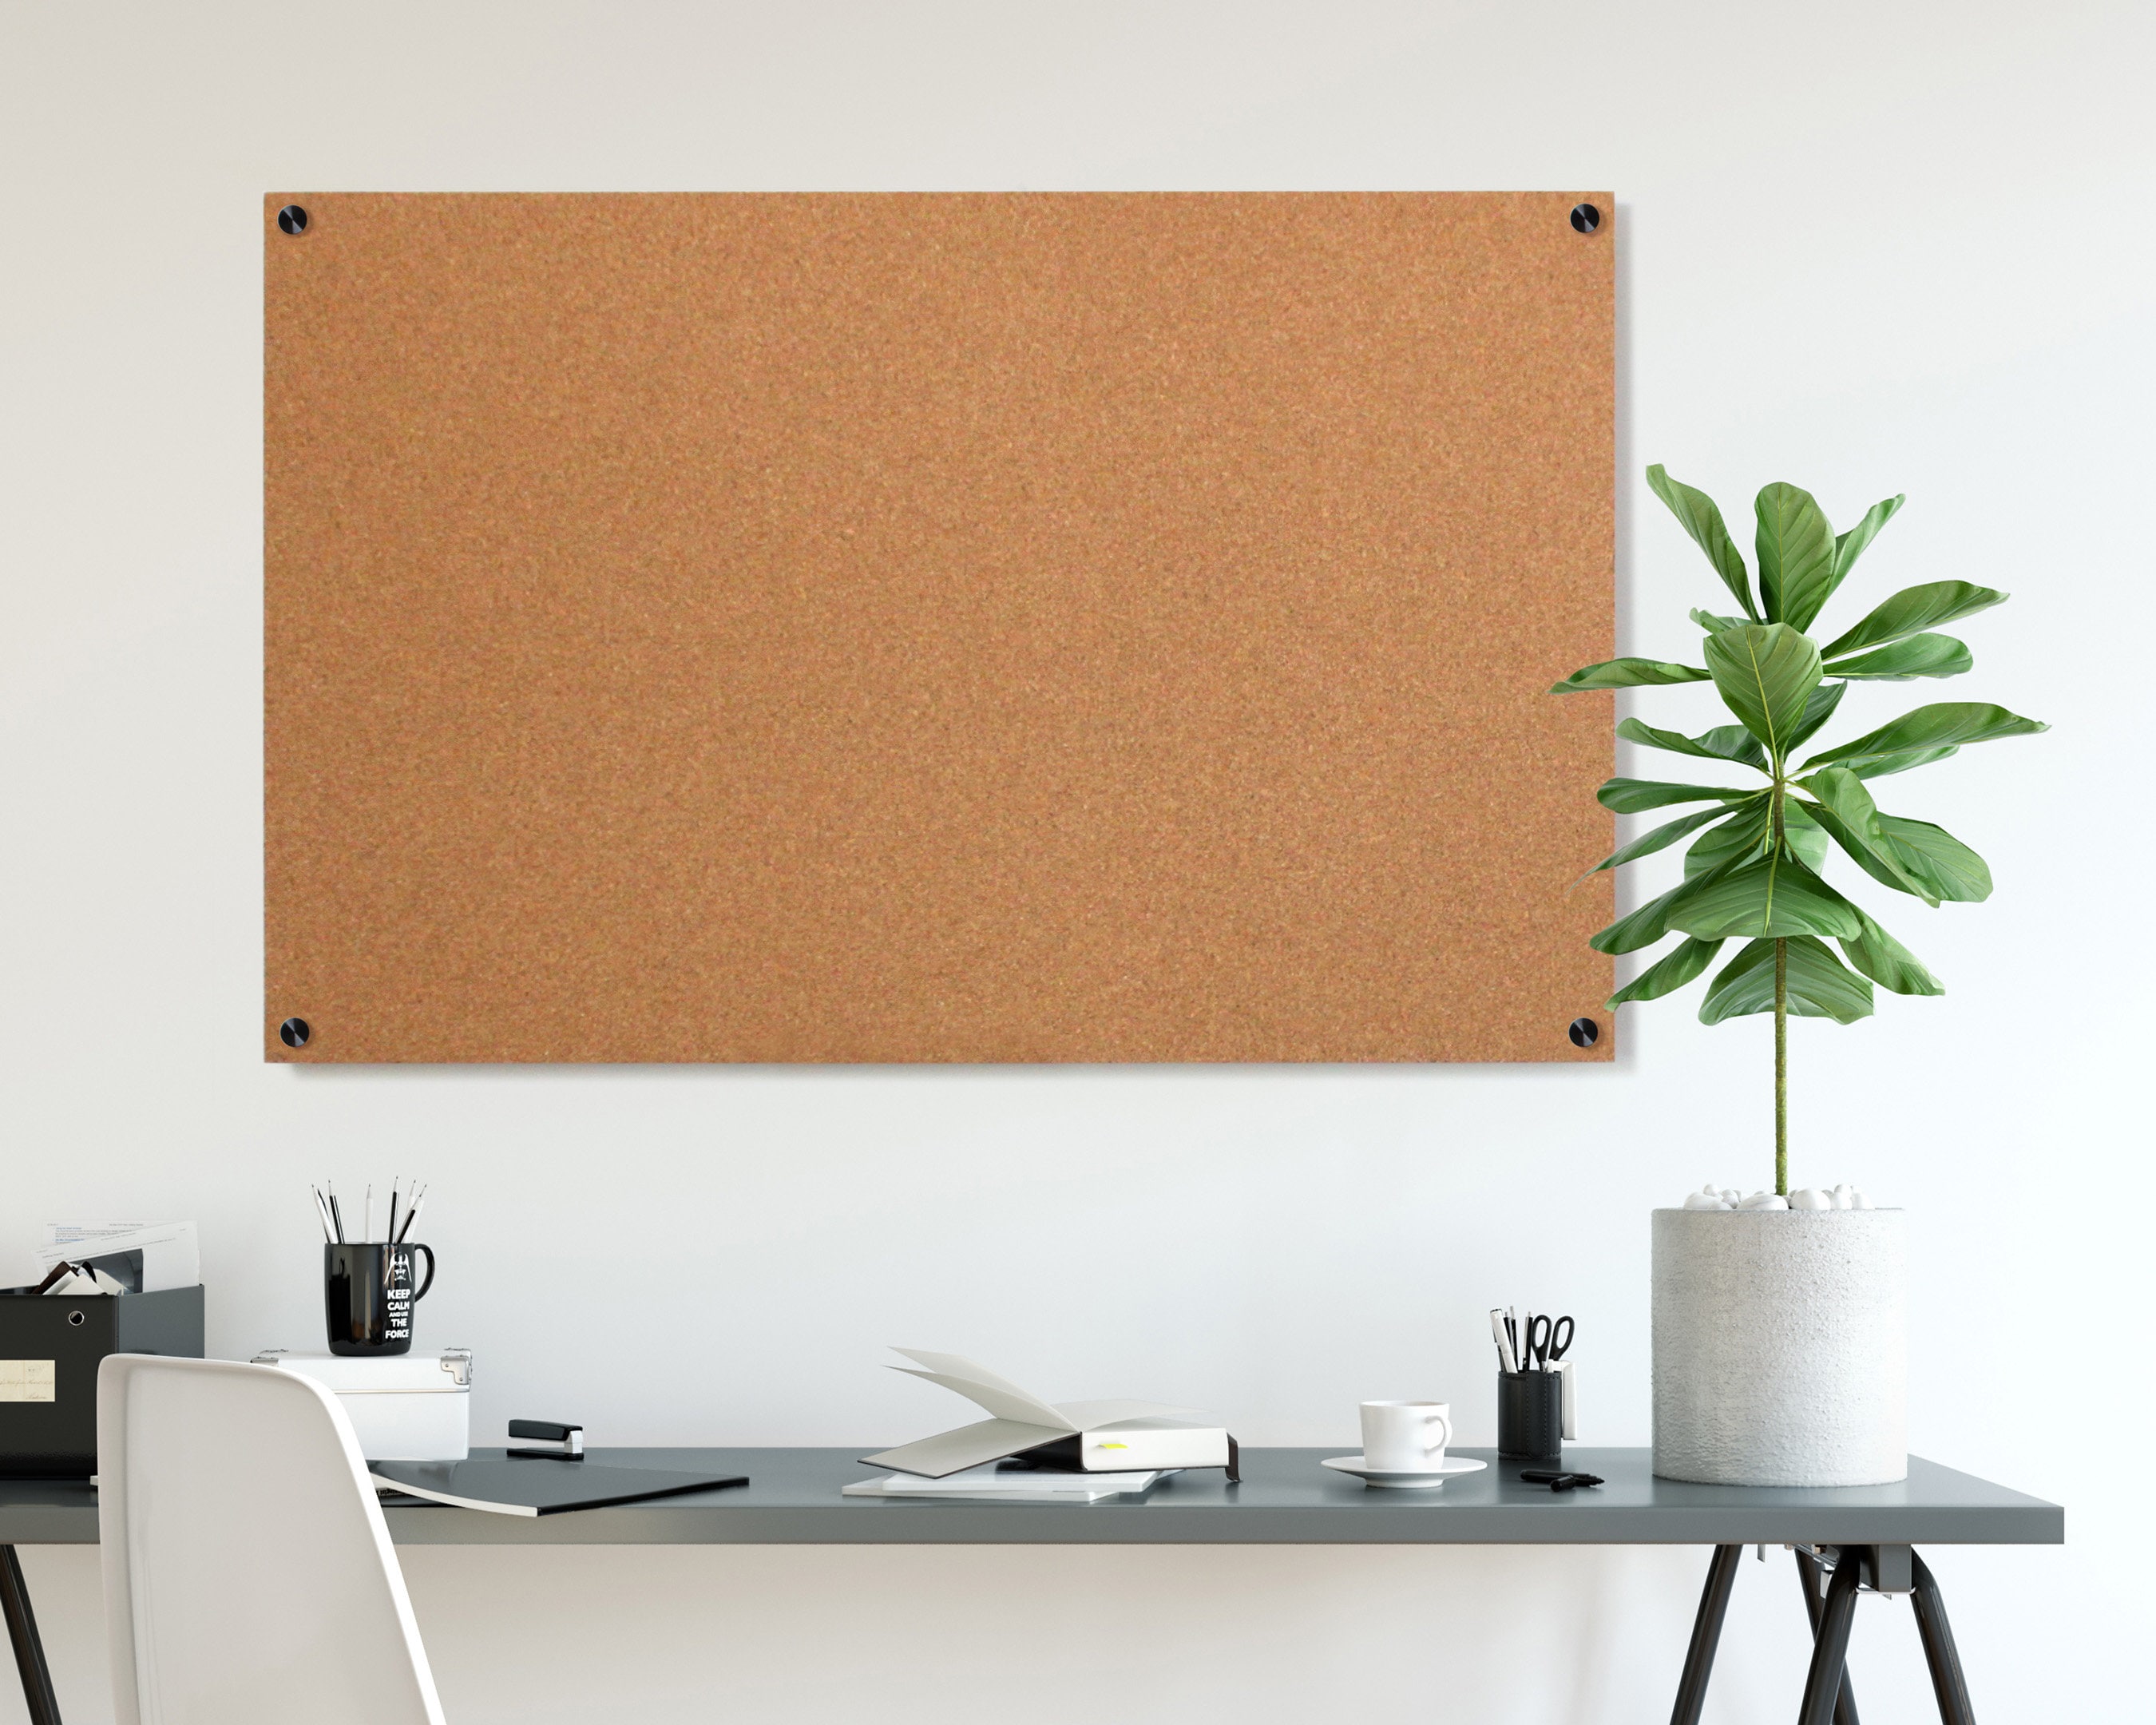 Small Cork Bulletin Board With Wooden Frame, 12 X 16 Inches Perfect For  Home Office Decor, Home School Message Board Or Vision Board